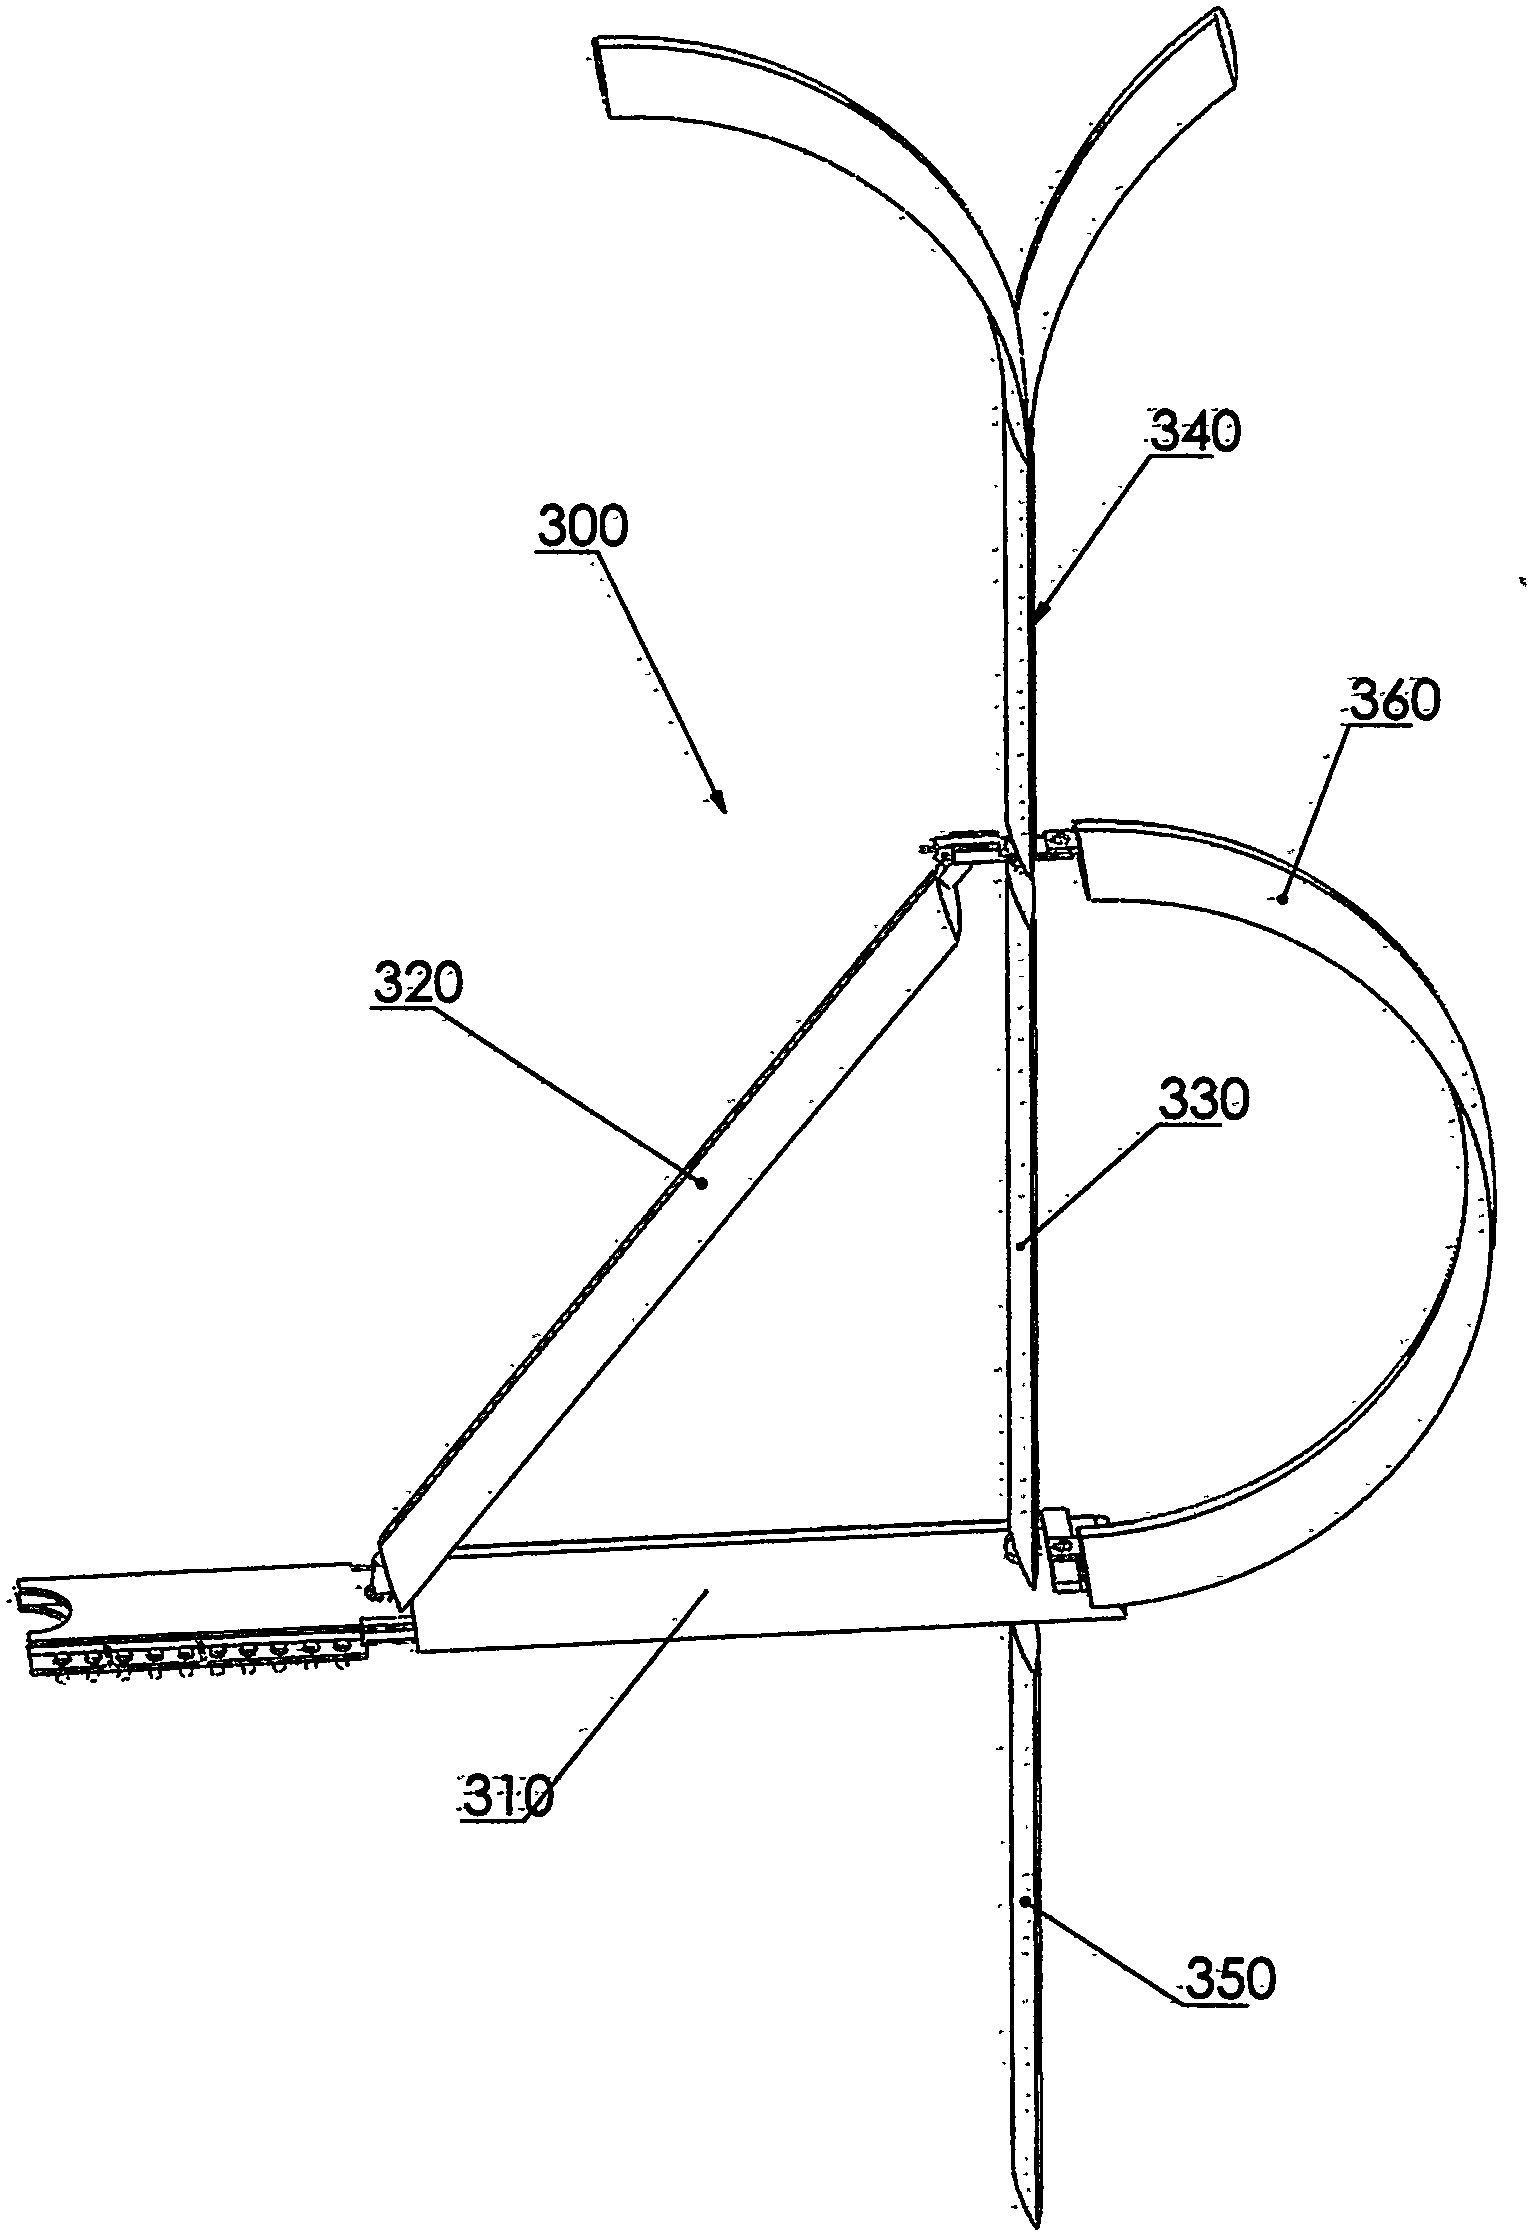 Trunk-free rotary table type vertical-axis wind turbine